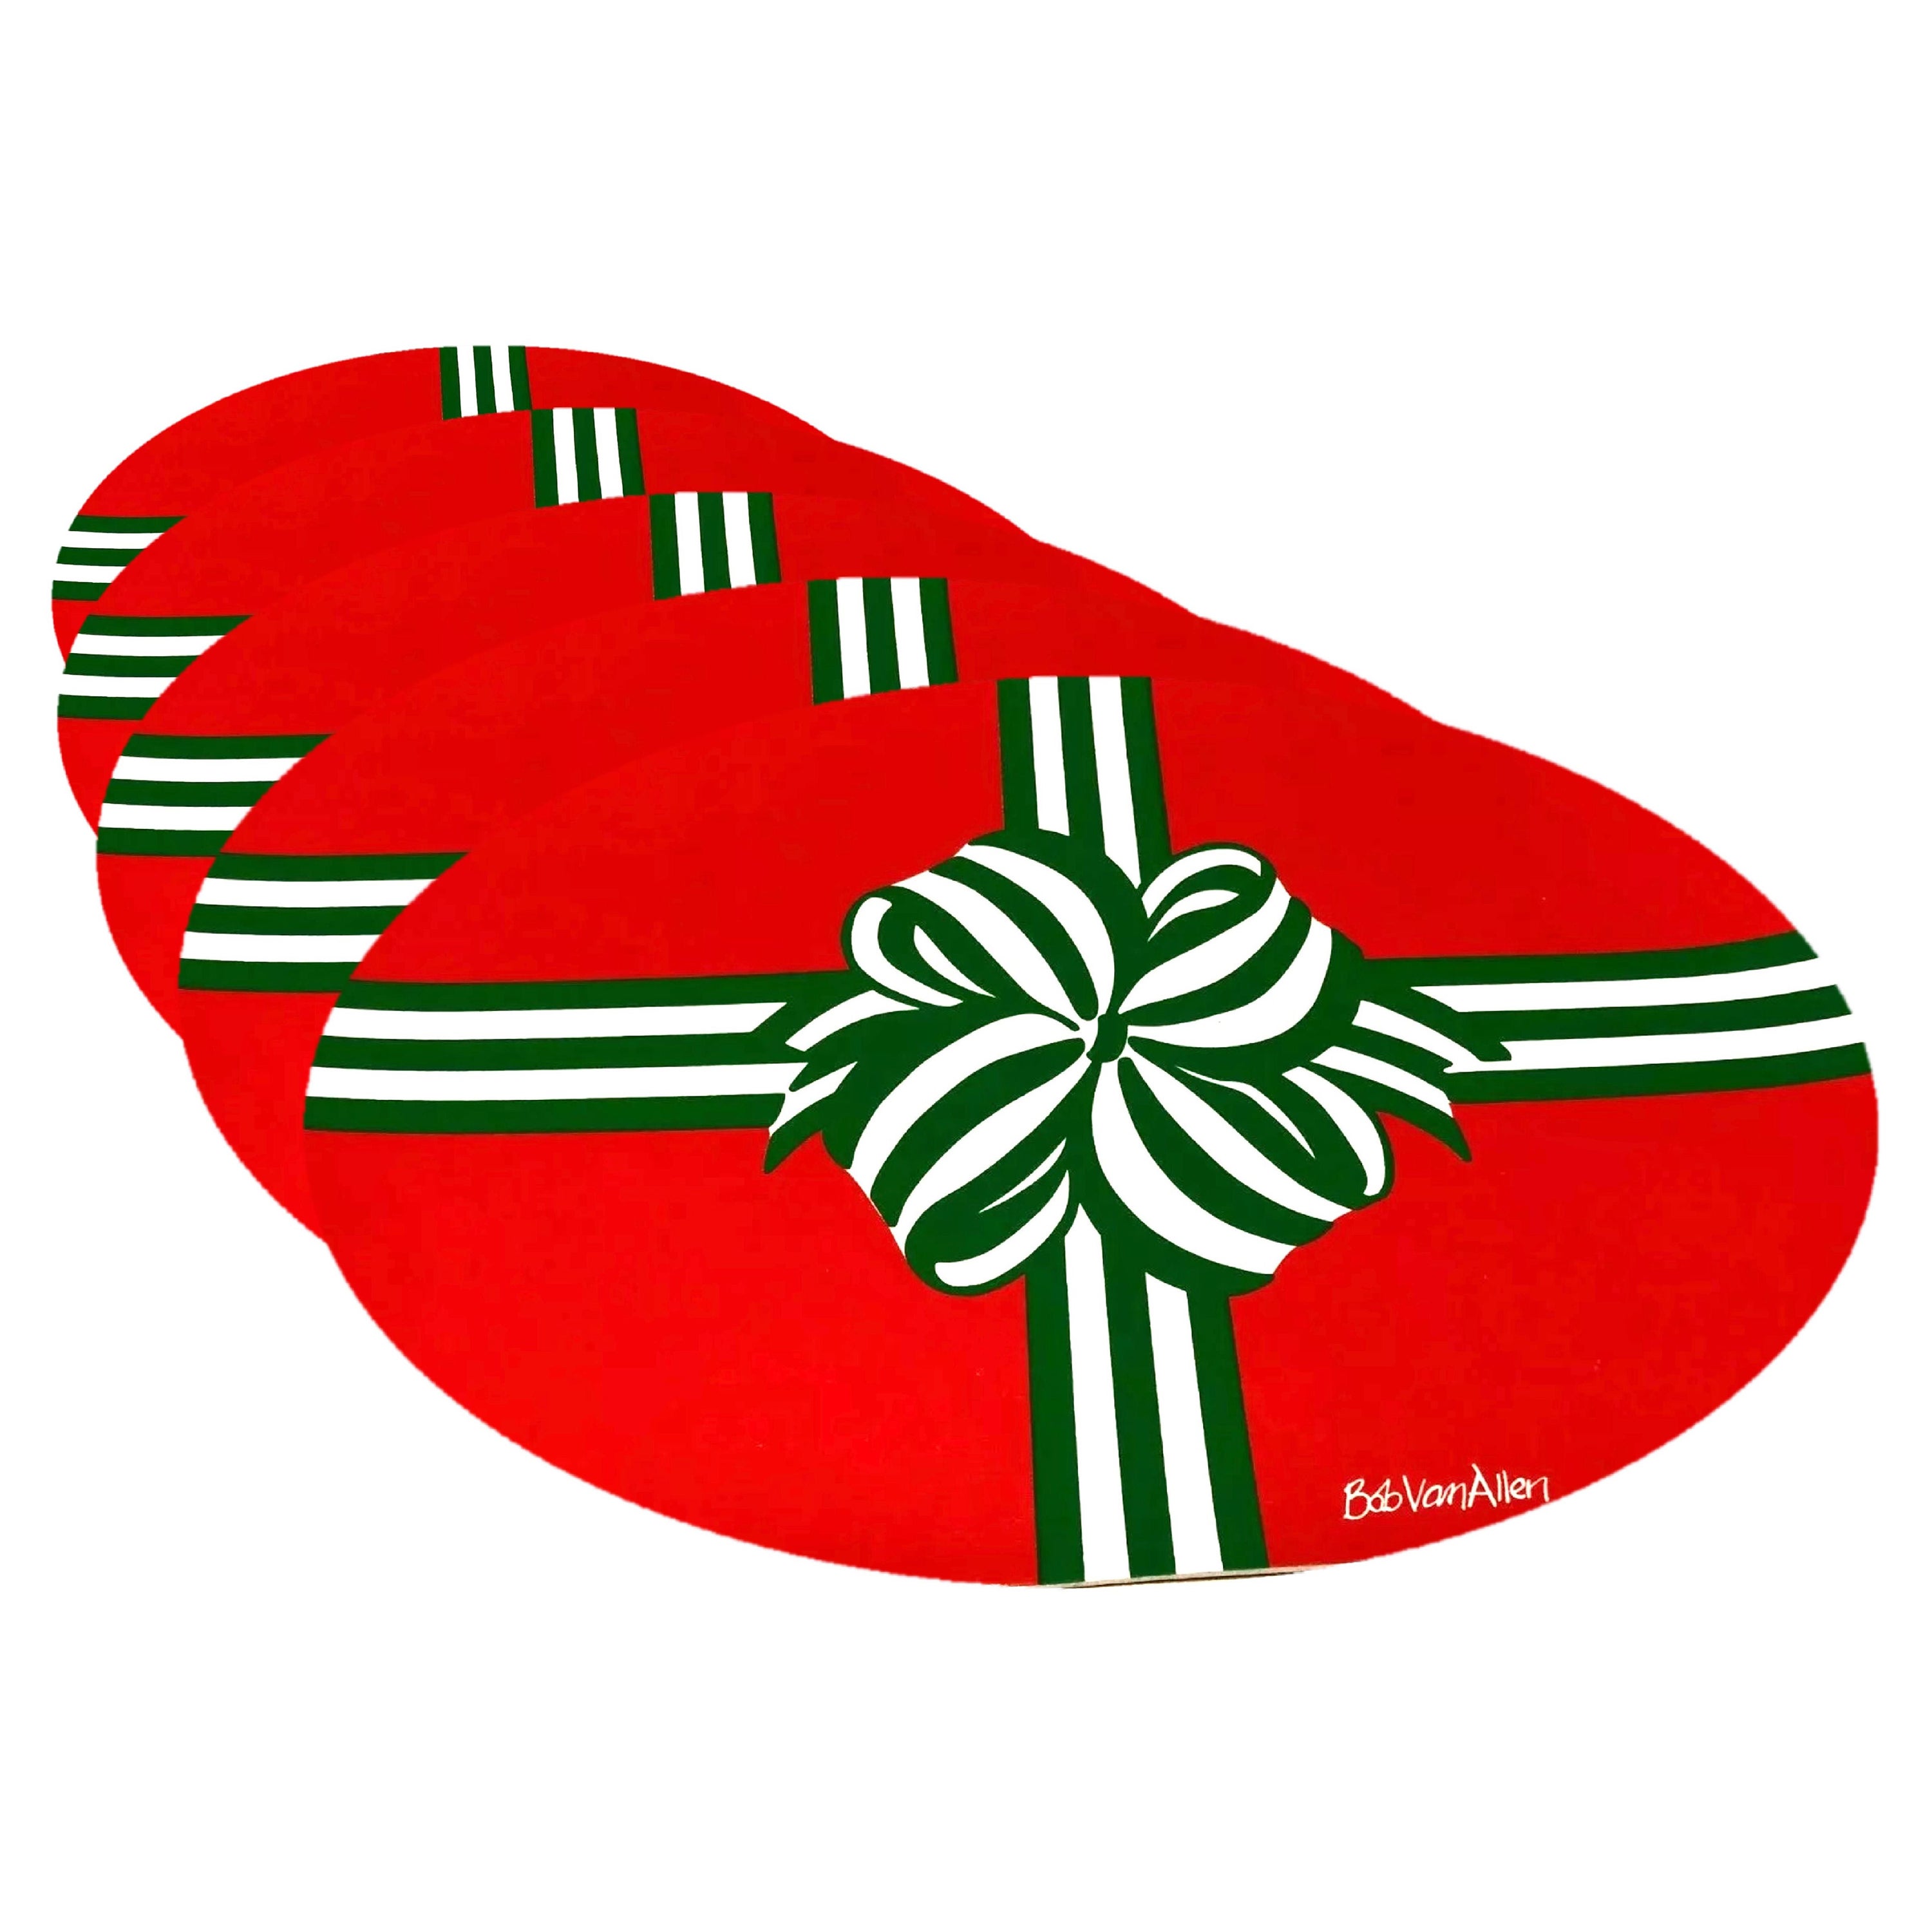 Bob Van Allen Holiday Bow Red & Green Oval Placemat Set of 5 & Napkin Set of 10 For Sale